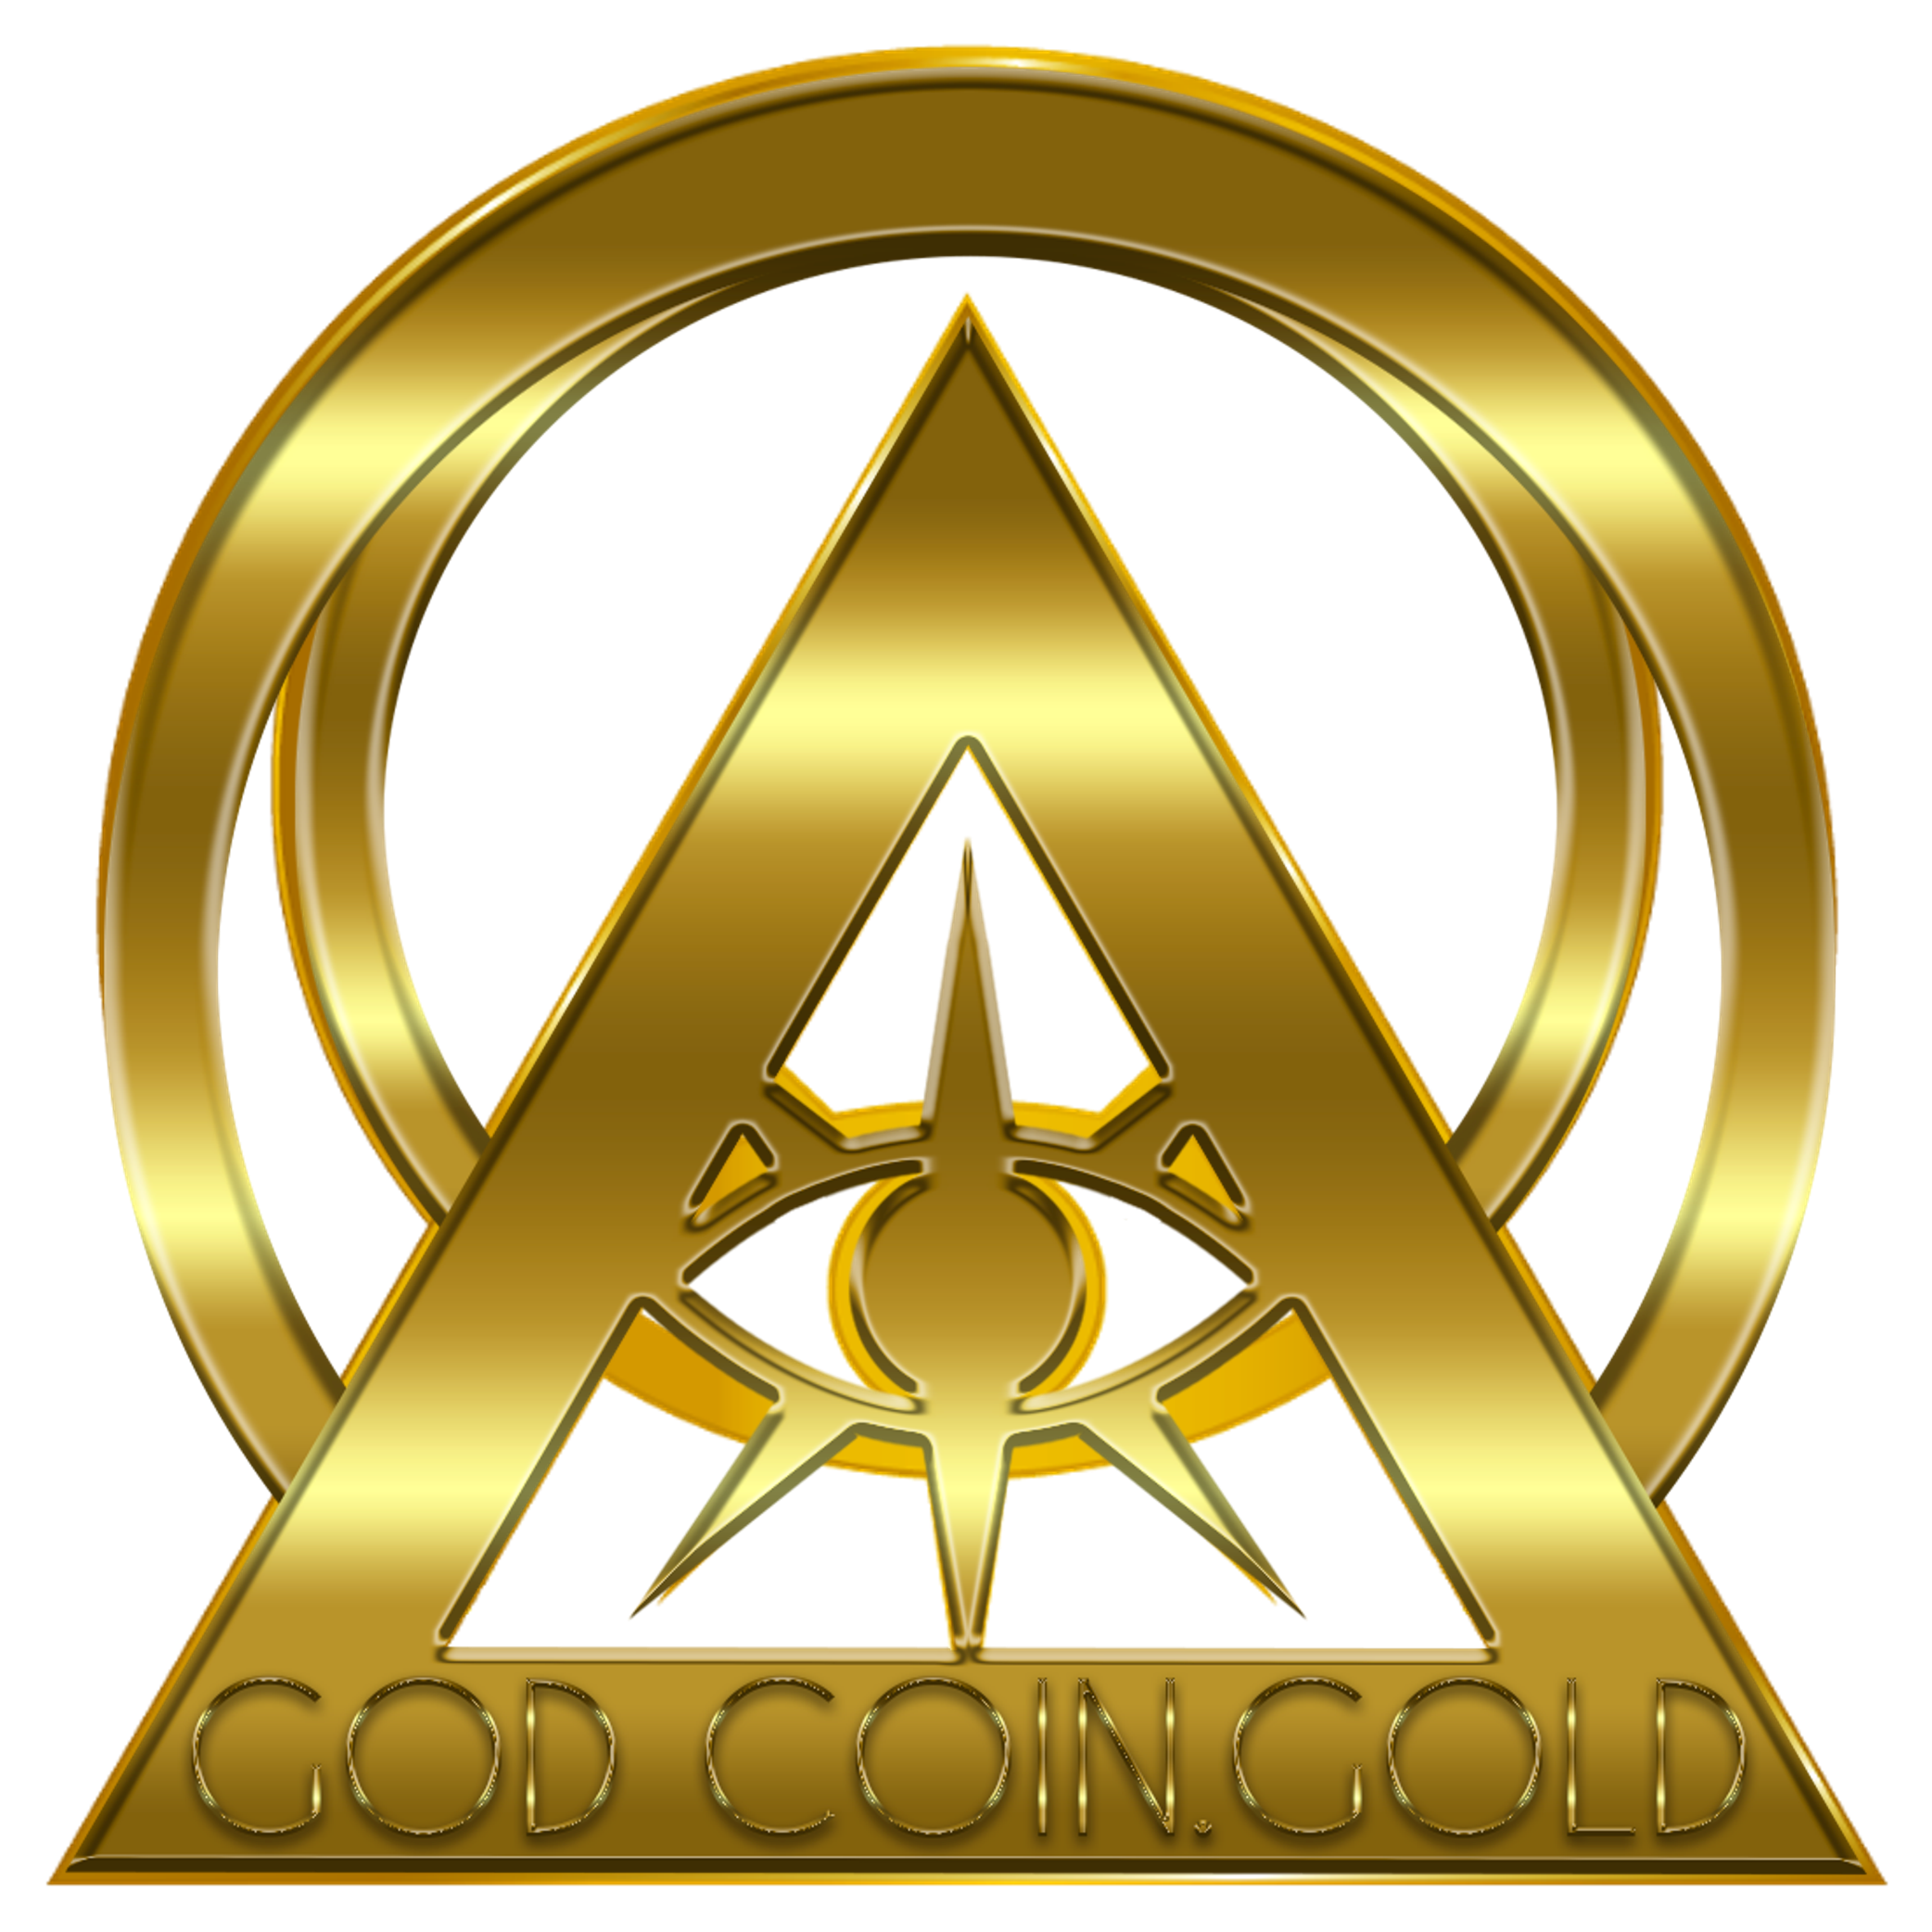 God coin cryptocurrency what are ico ethereum